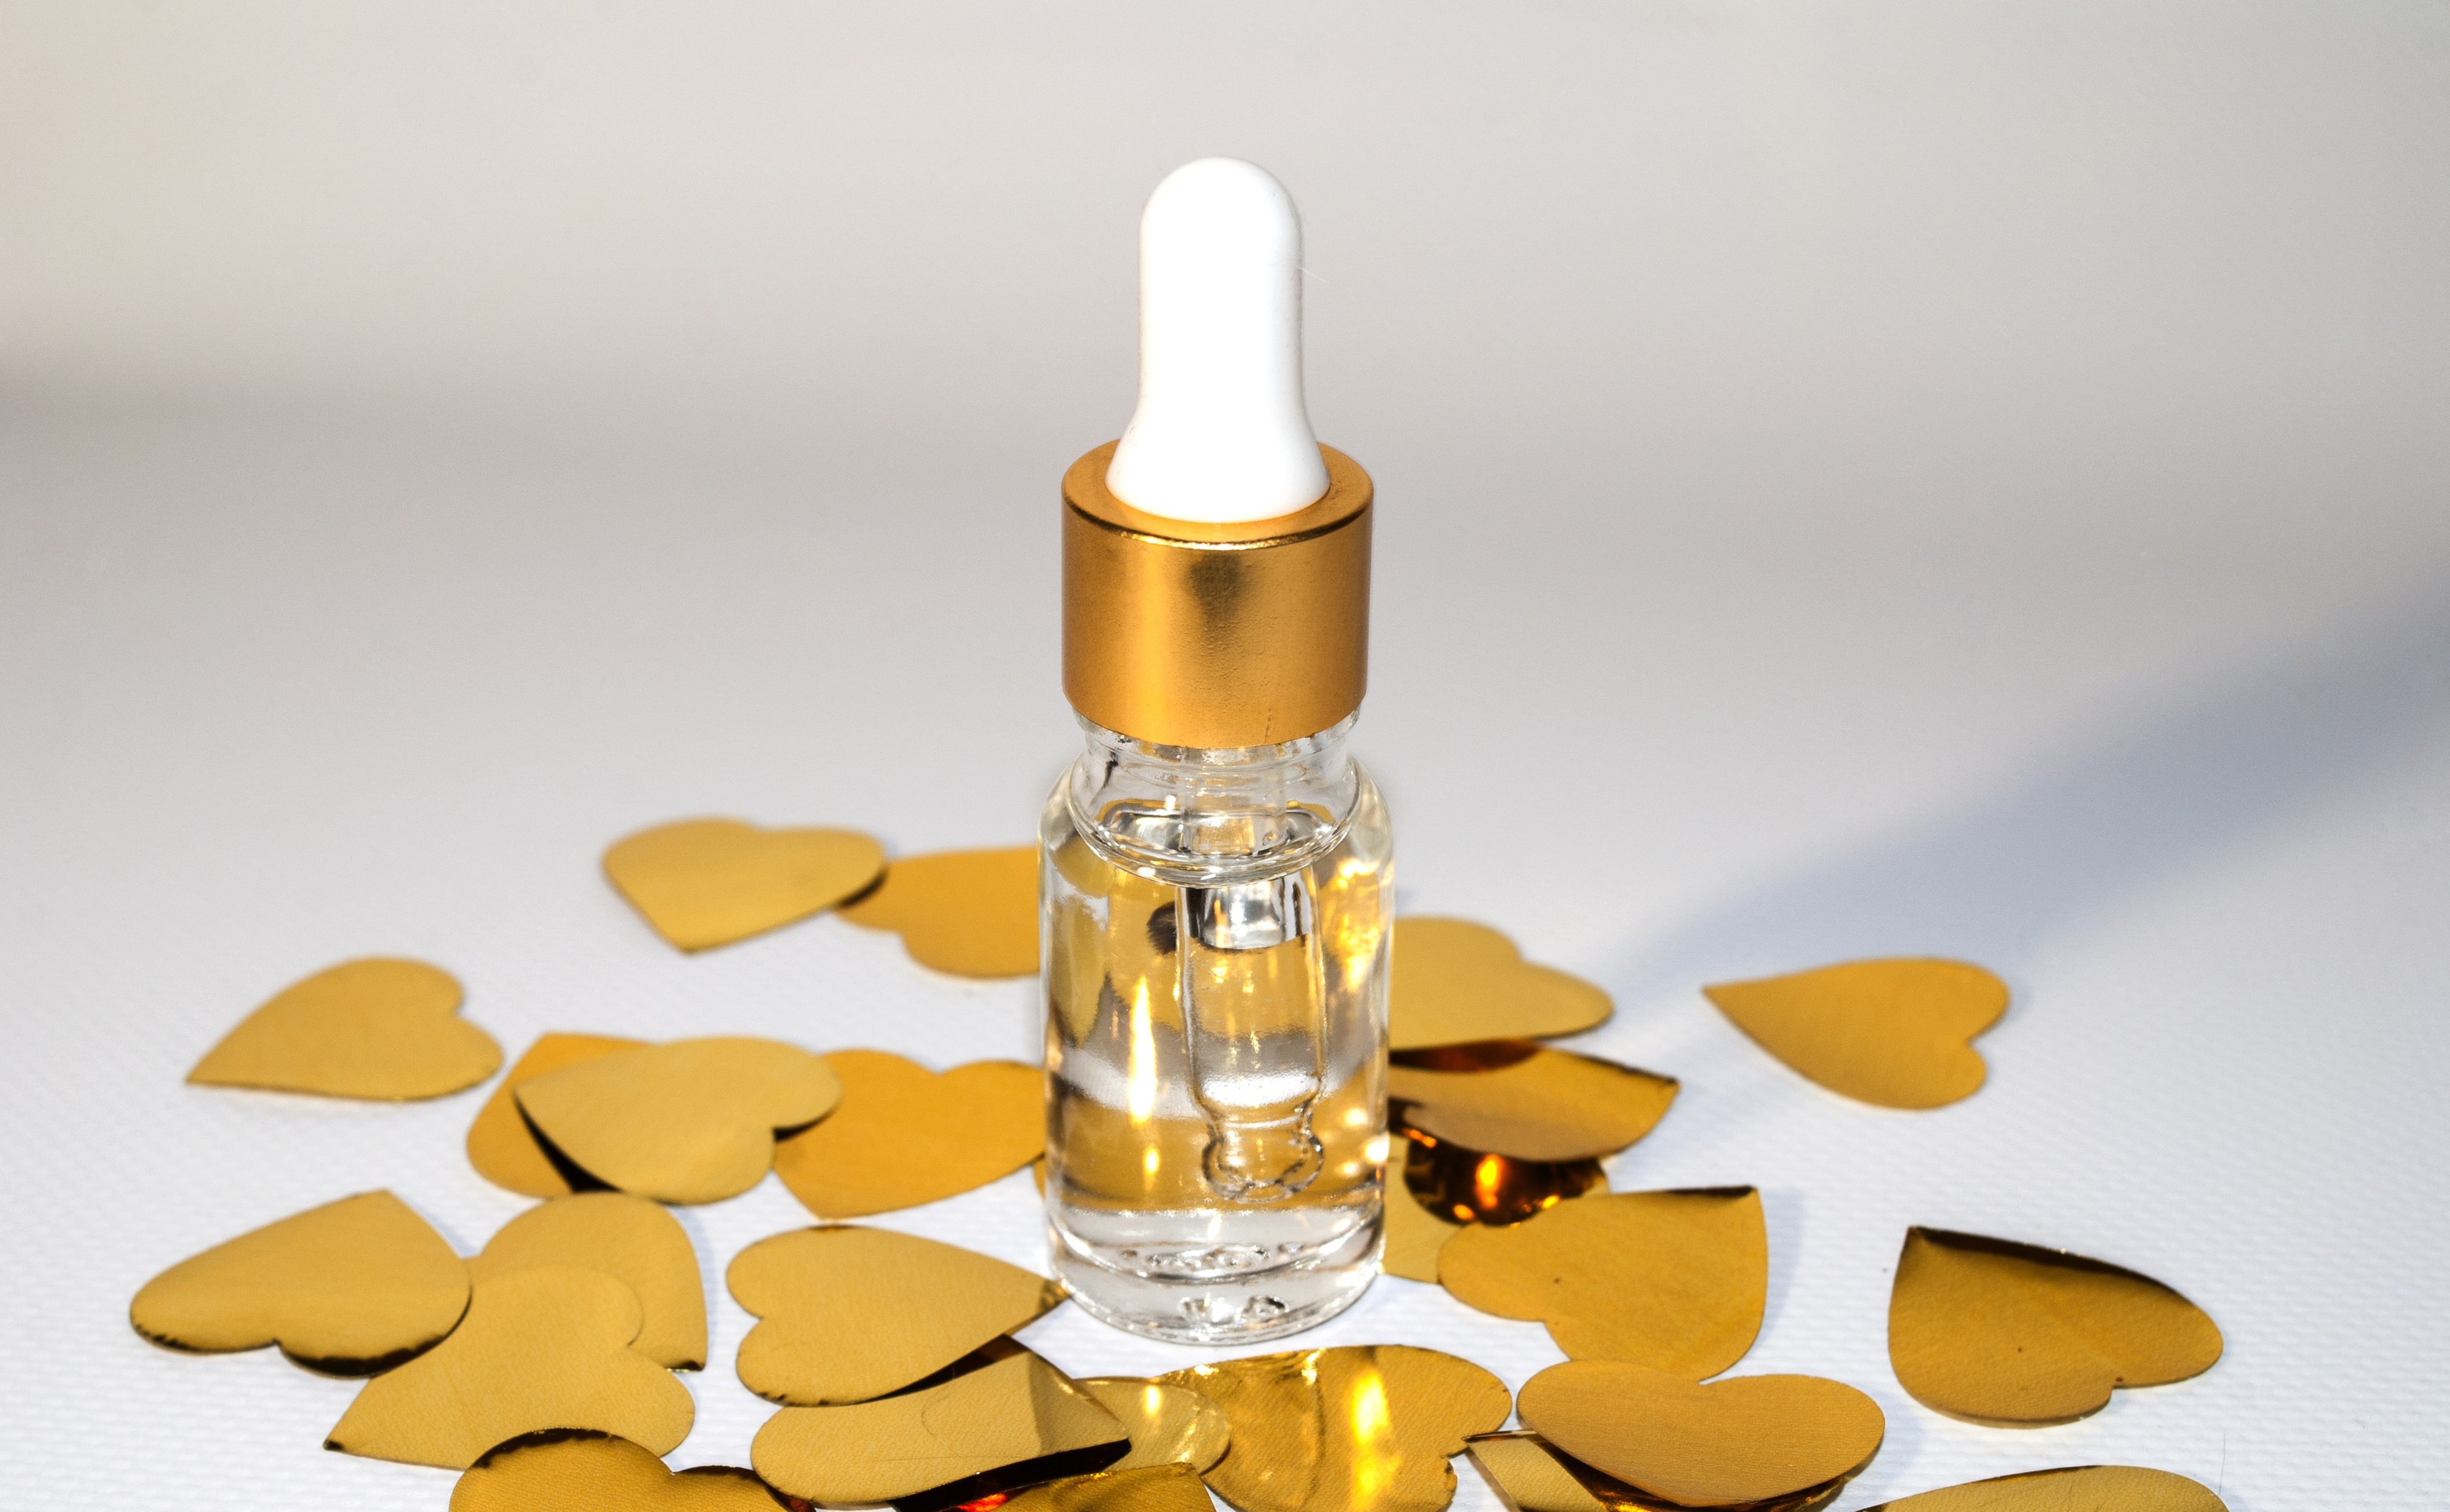 Use this instead of pheromone perfumes…time to be lathered & slathered, body oil